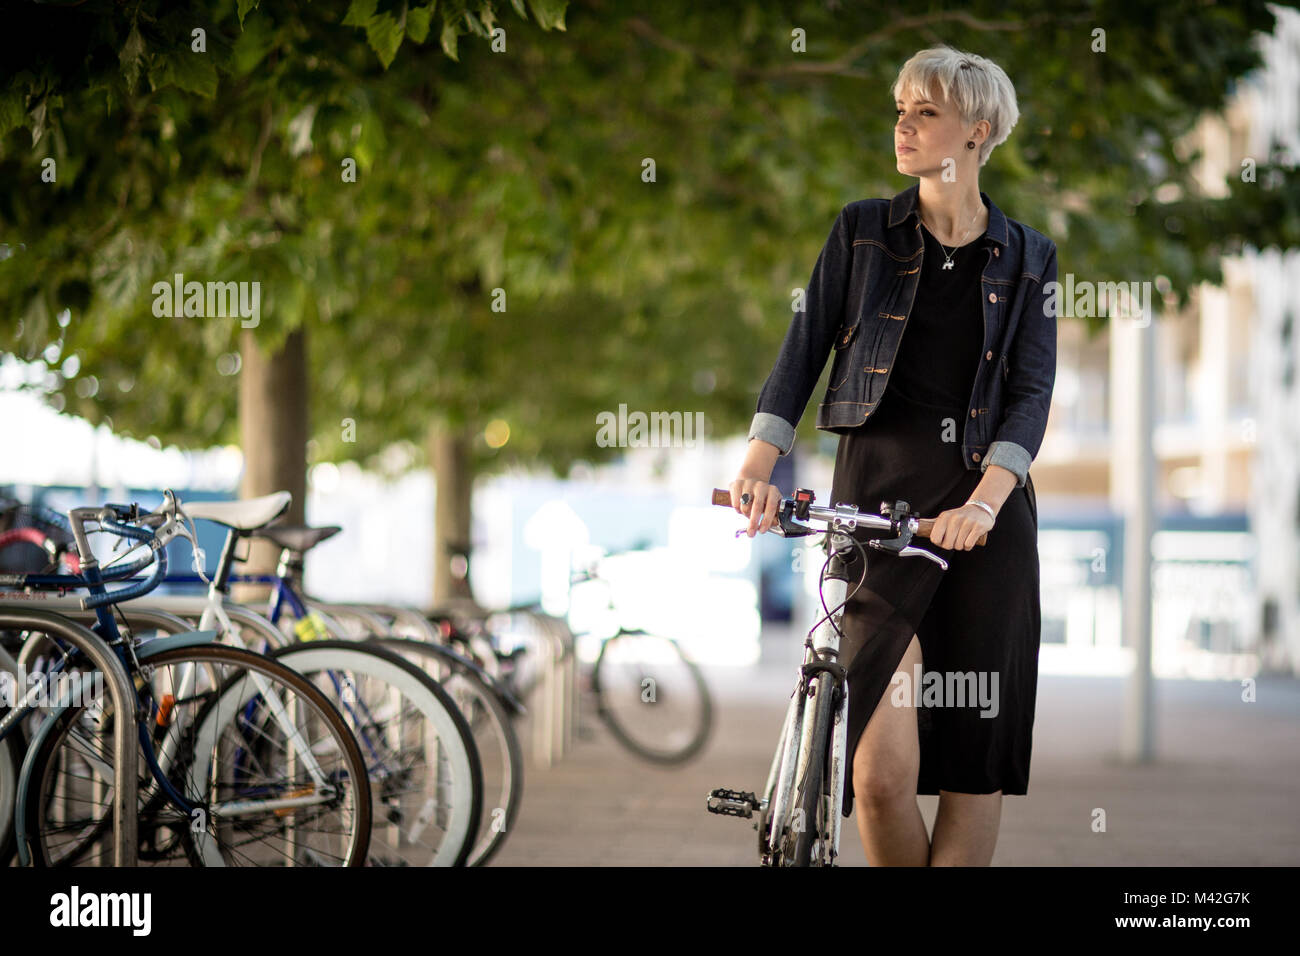 Young adult commuting on bike Stock Photo